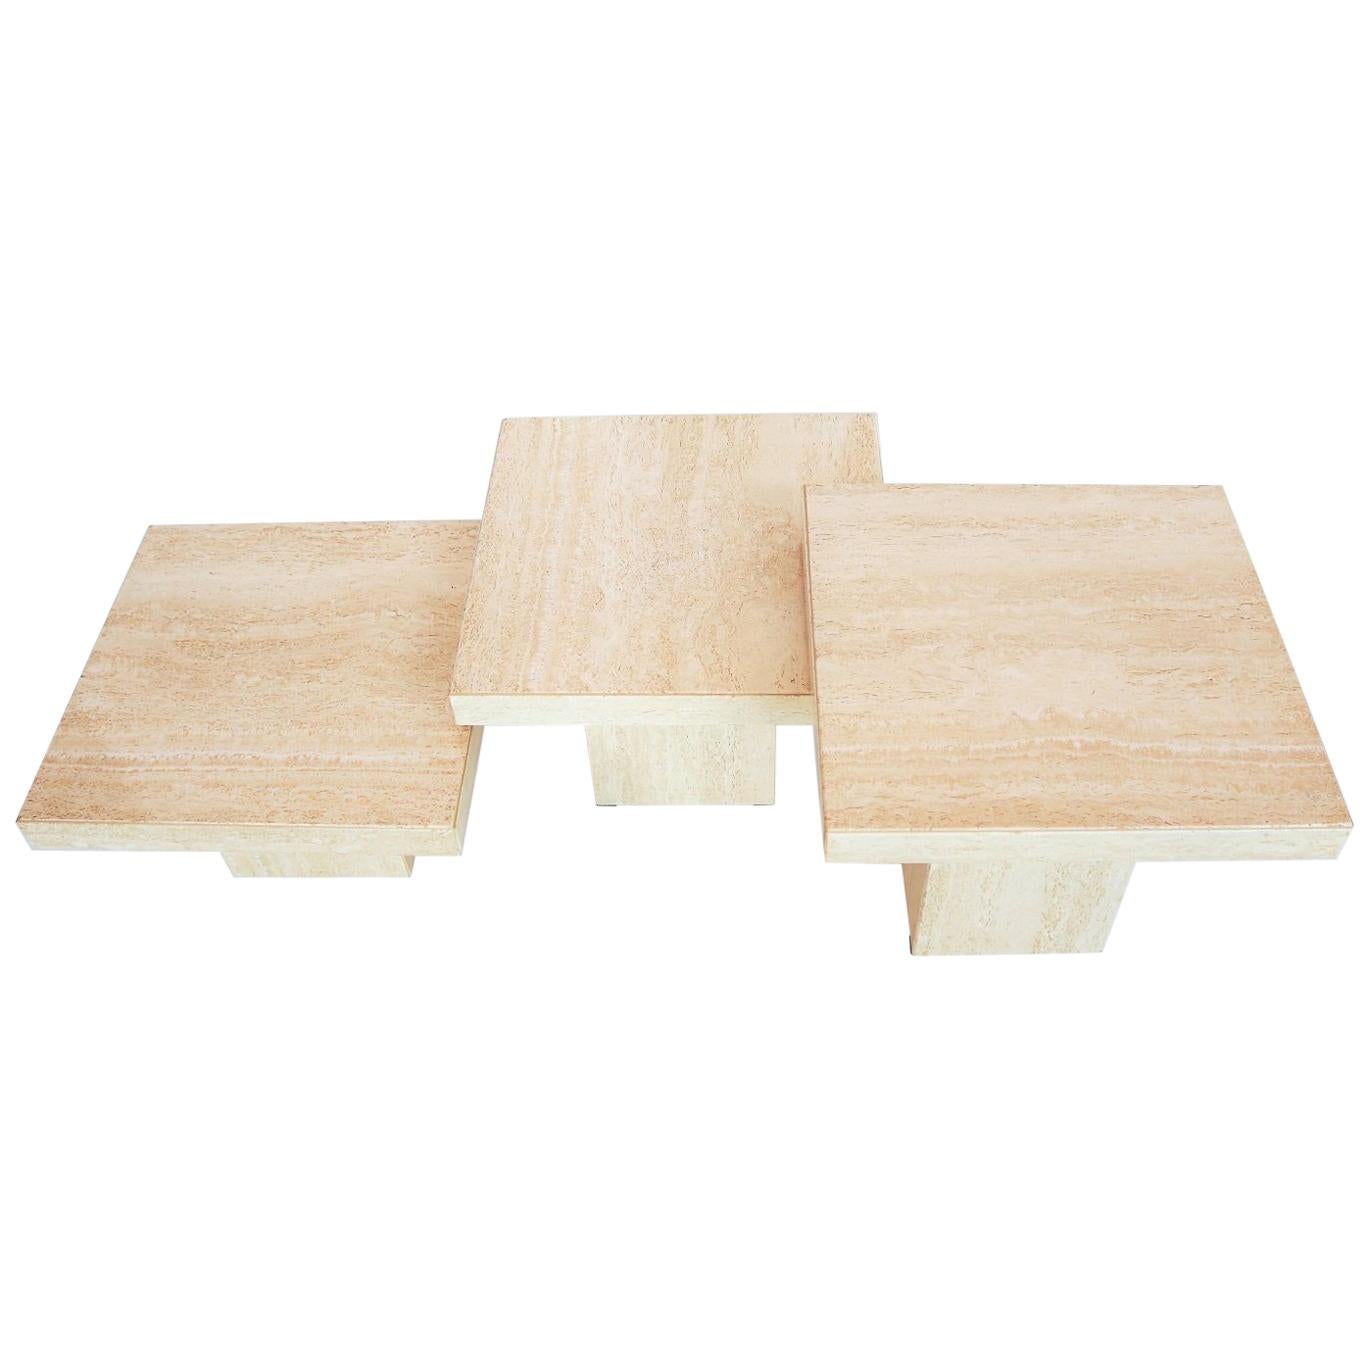 Italian Travertine Marble Coffee Tables from the 1970s, Set of Three